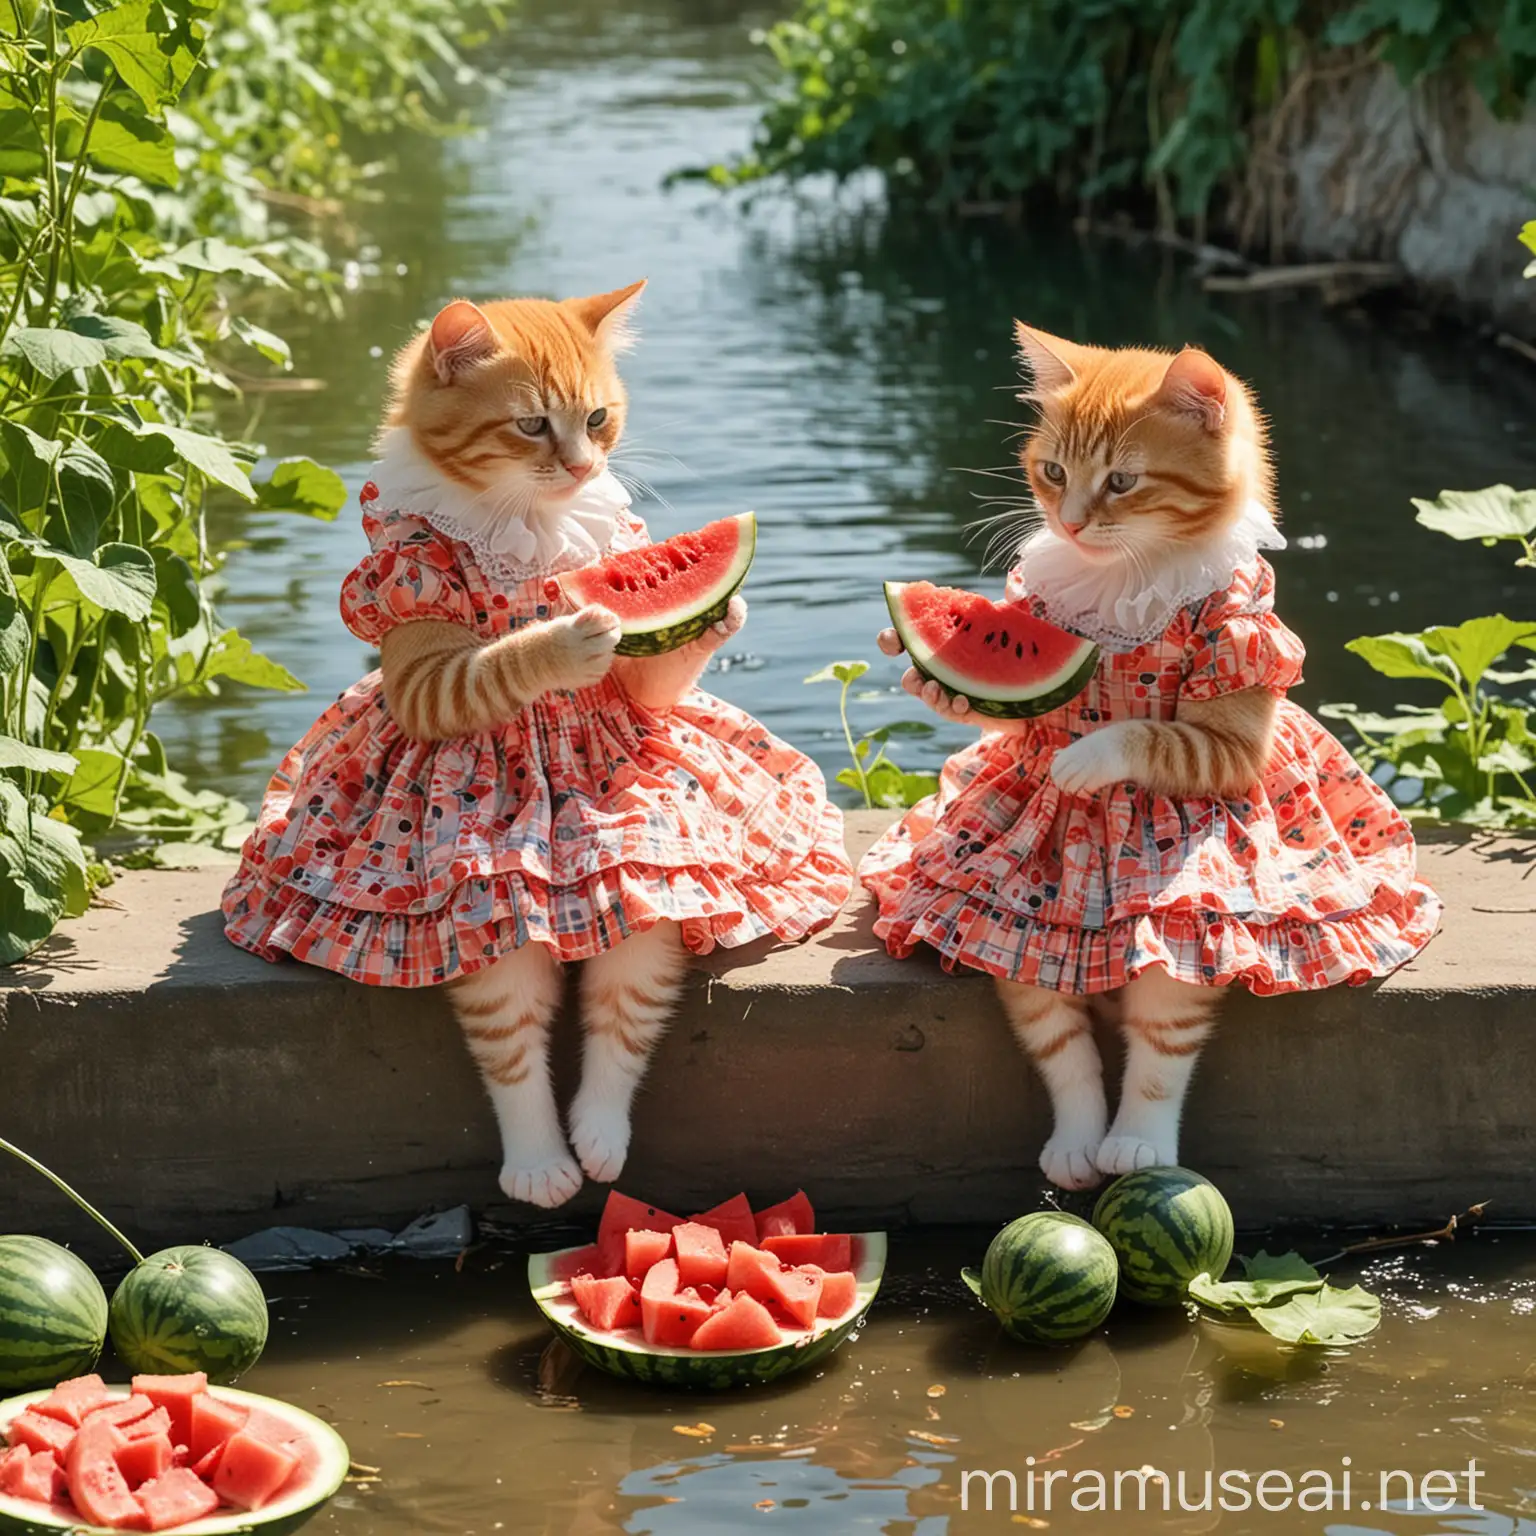 On a sunny afternoon, two little orange cats with dresses are eating watermelons by the river